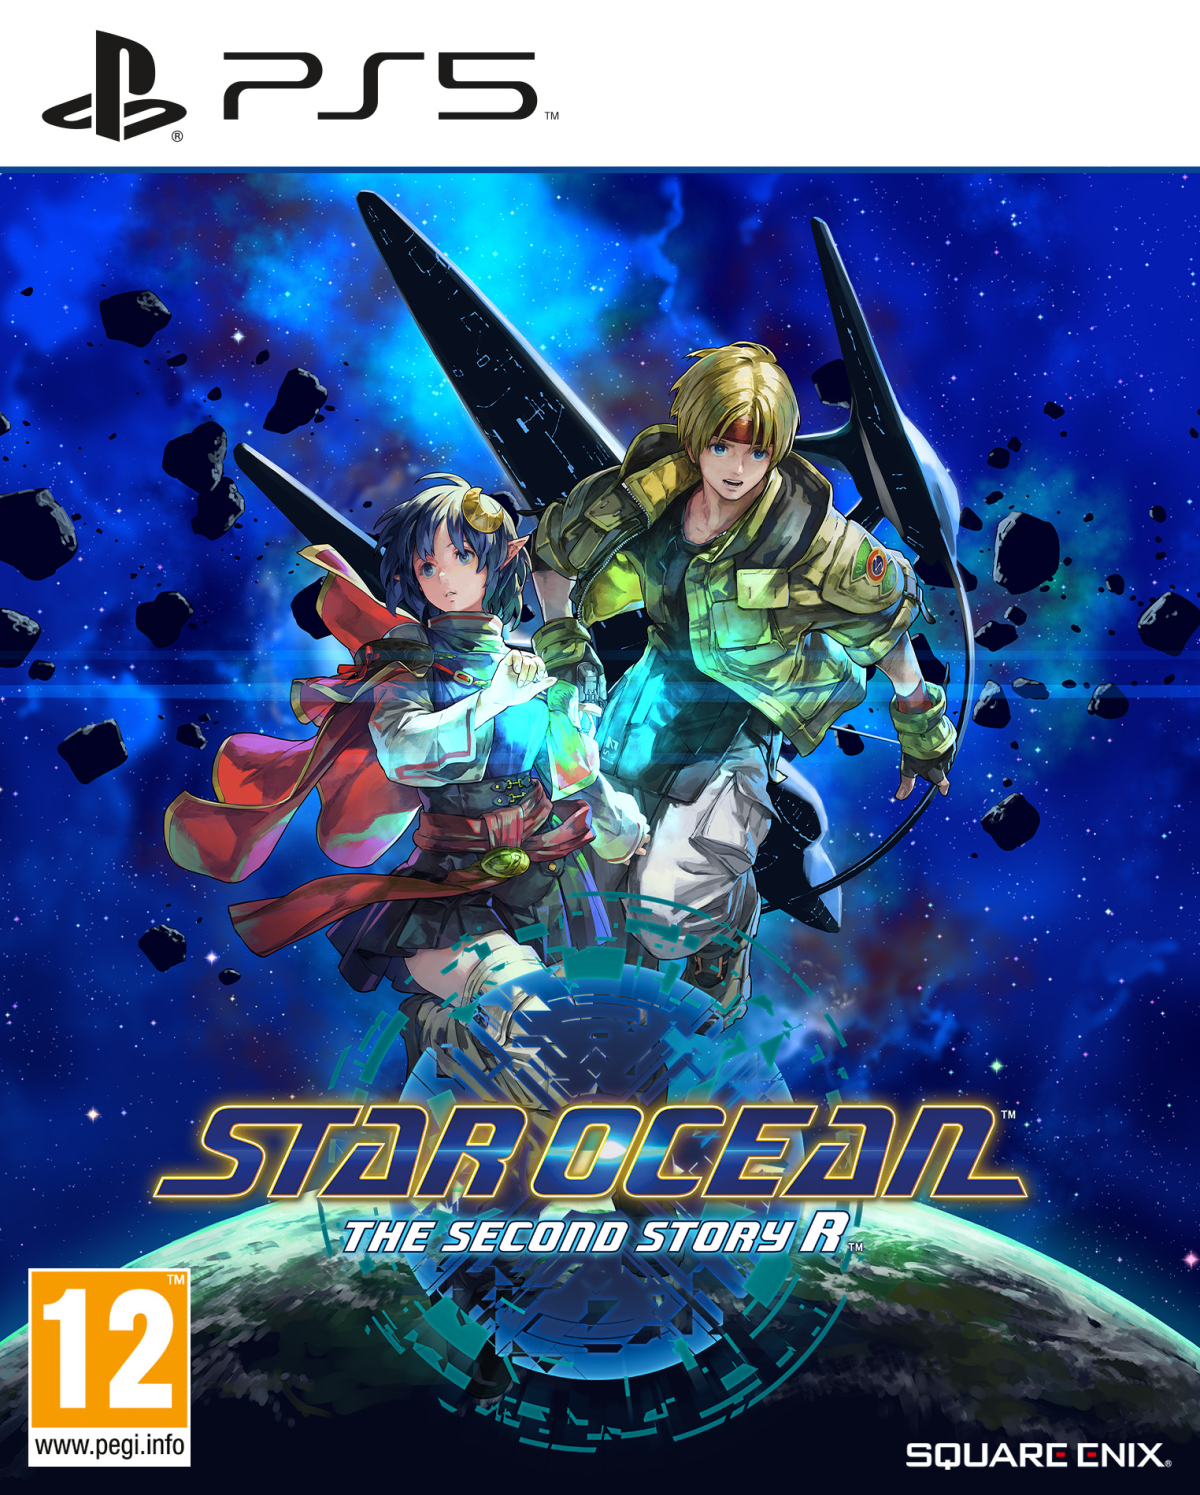 PS5 Star Ocean The Second Story R